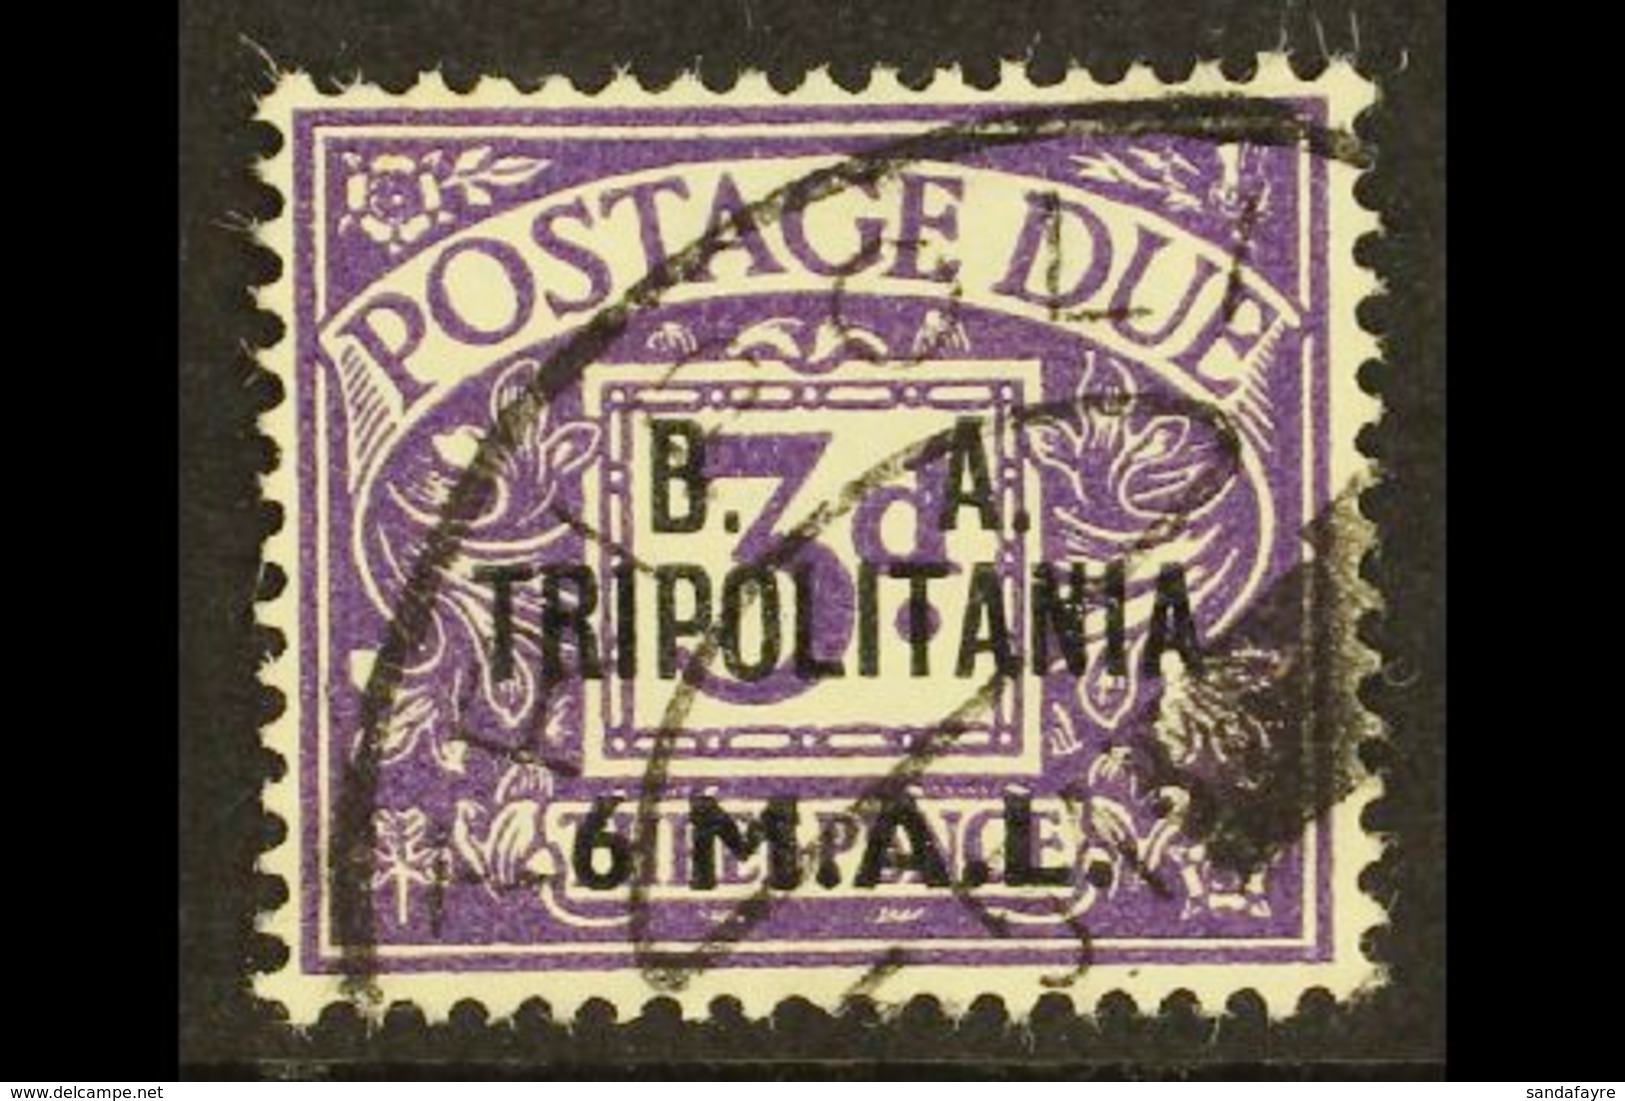 TRIPOLITANIA  POSTAGE DUE 1950 6l On 3d Violet, "B. A. TRIPOLITANIA" Ovpt, SG TD9, Good To Fine Used. For More Images, P - Italienisch Ost-Afrika